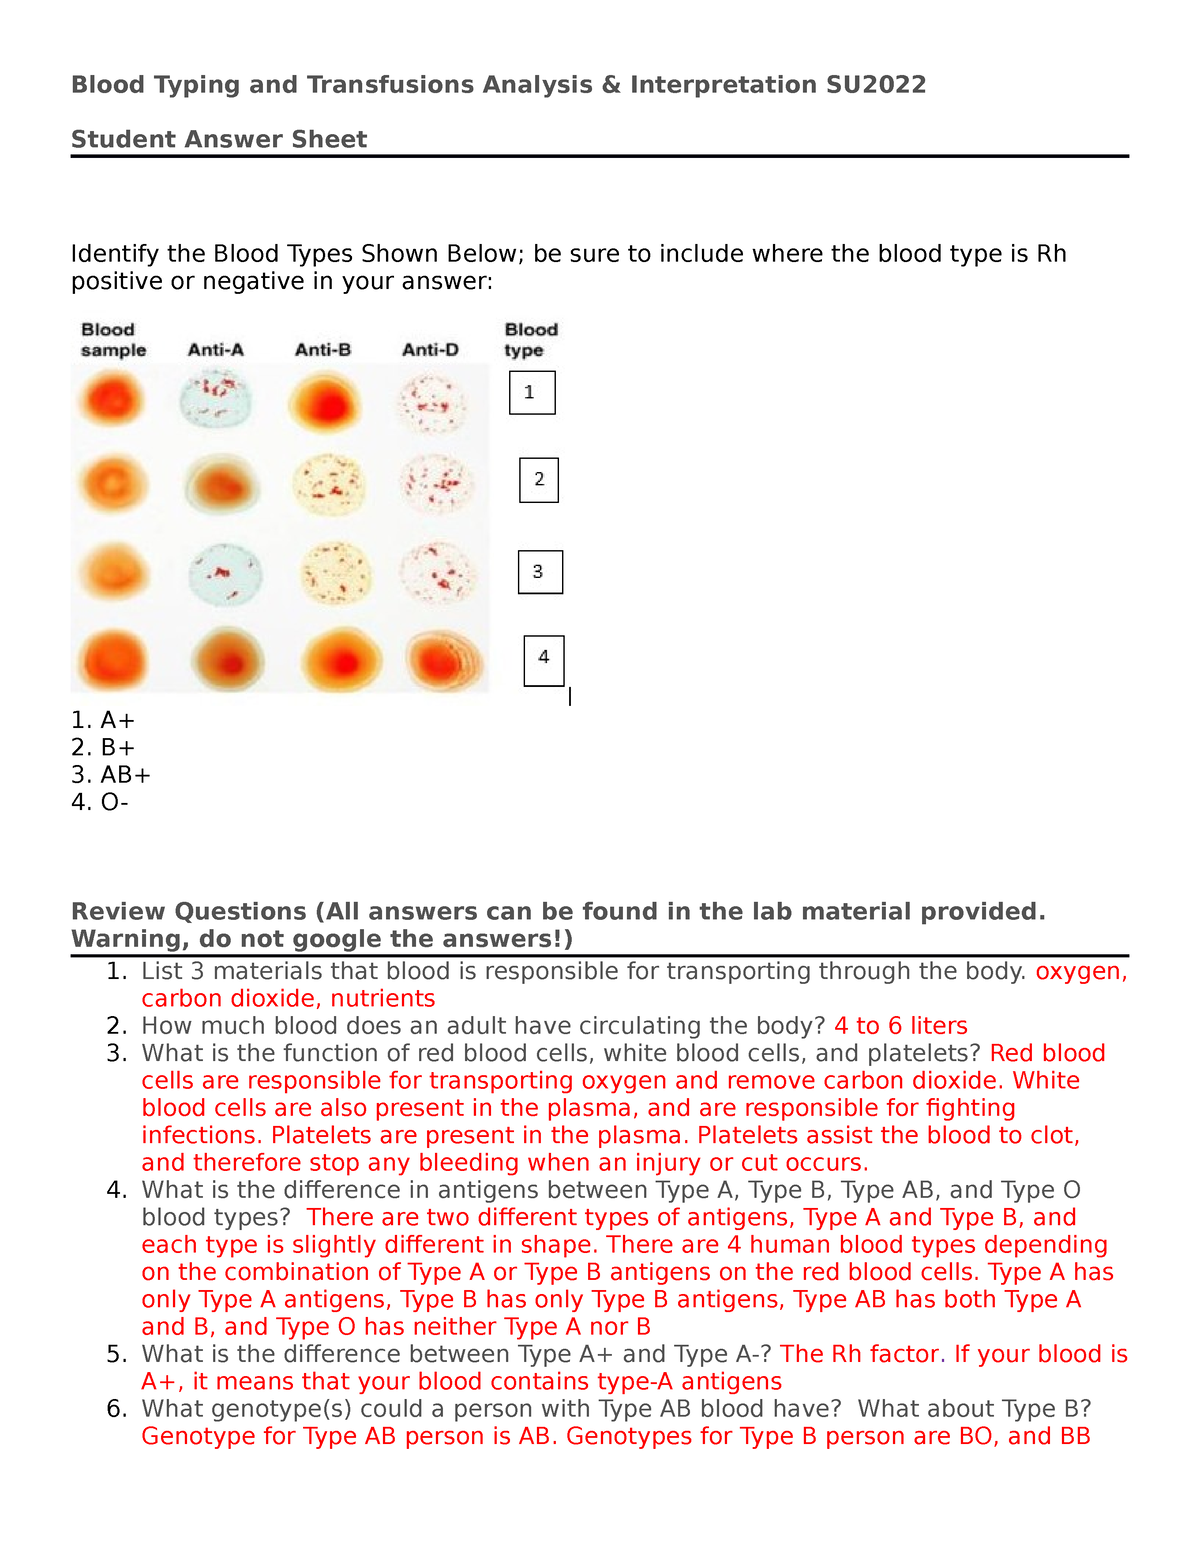 blood-typing-and-transfusions-student-answer-sheet-blood-typing-and-transfusions-analysis